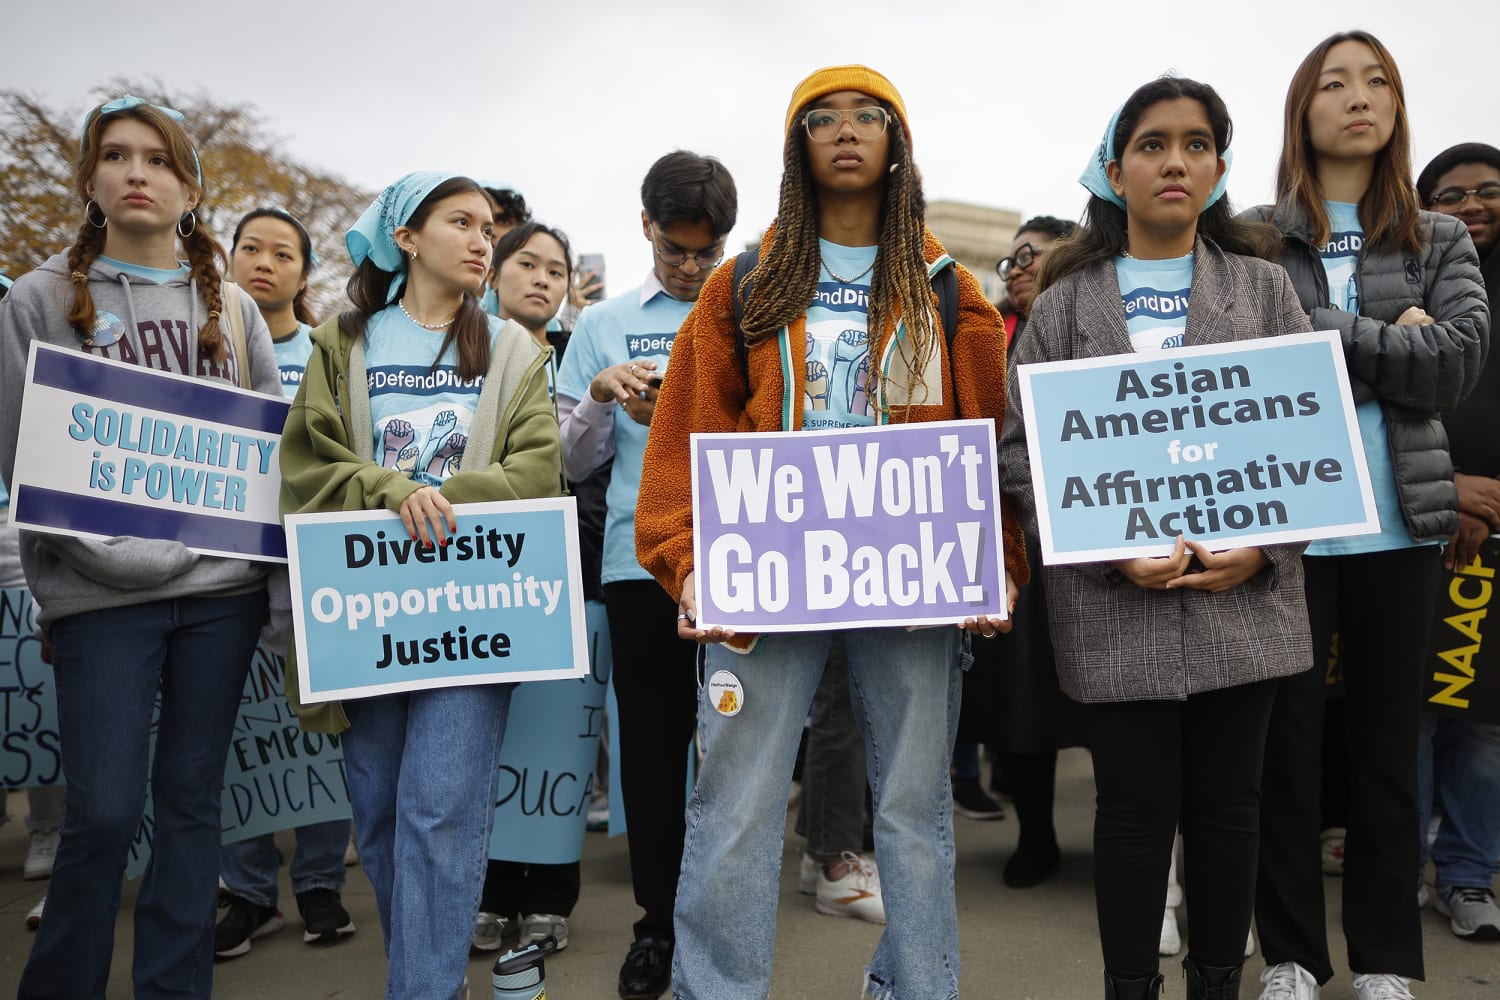 Majority of Americans favor affirmative action in colleges as Supreme Court seems poised to end it, poll says